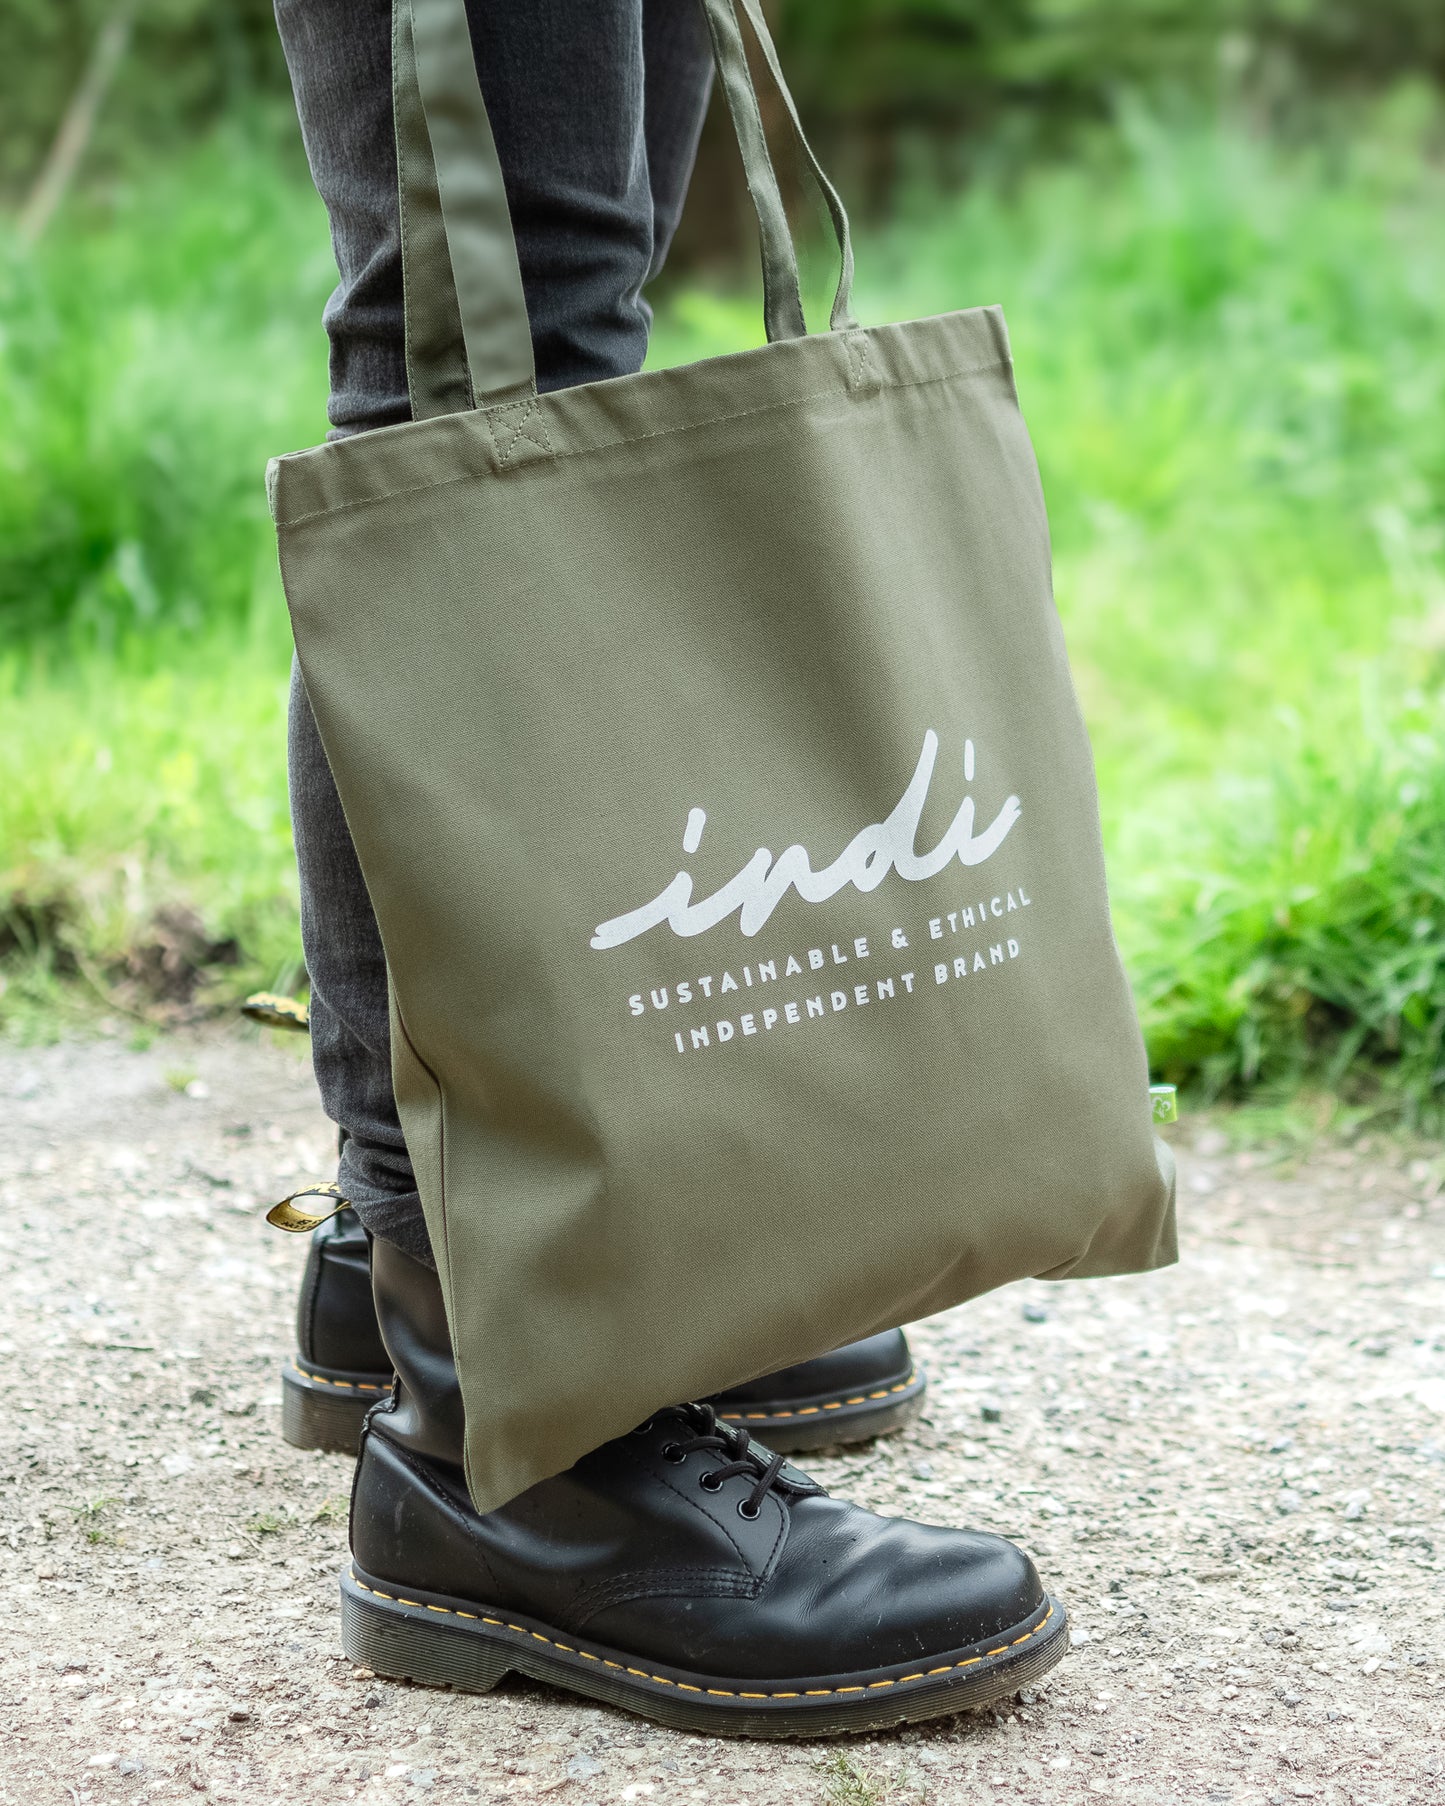 Strong Canvas Tote Bag in Khaki